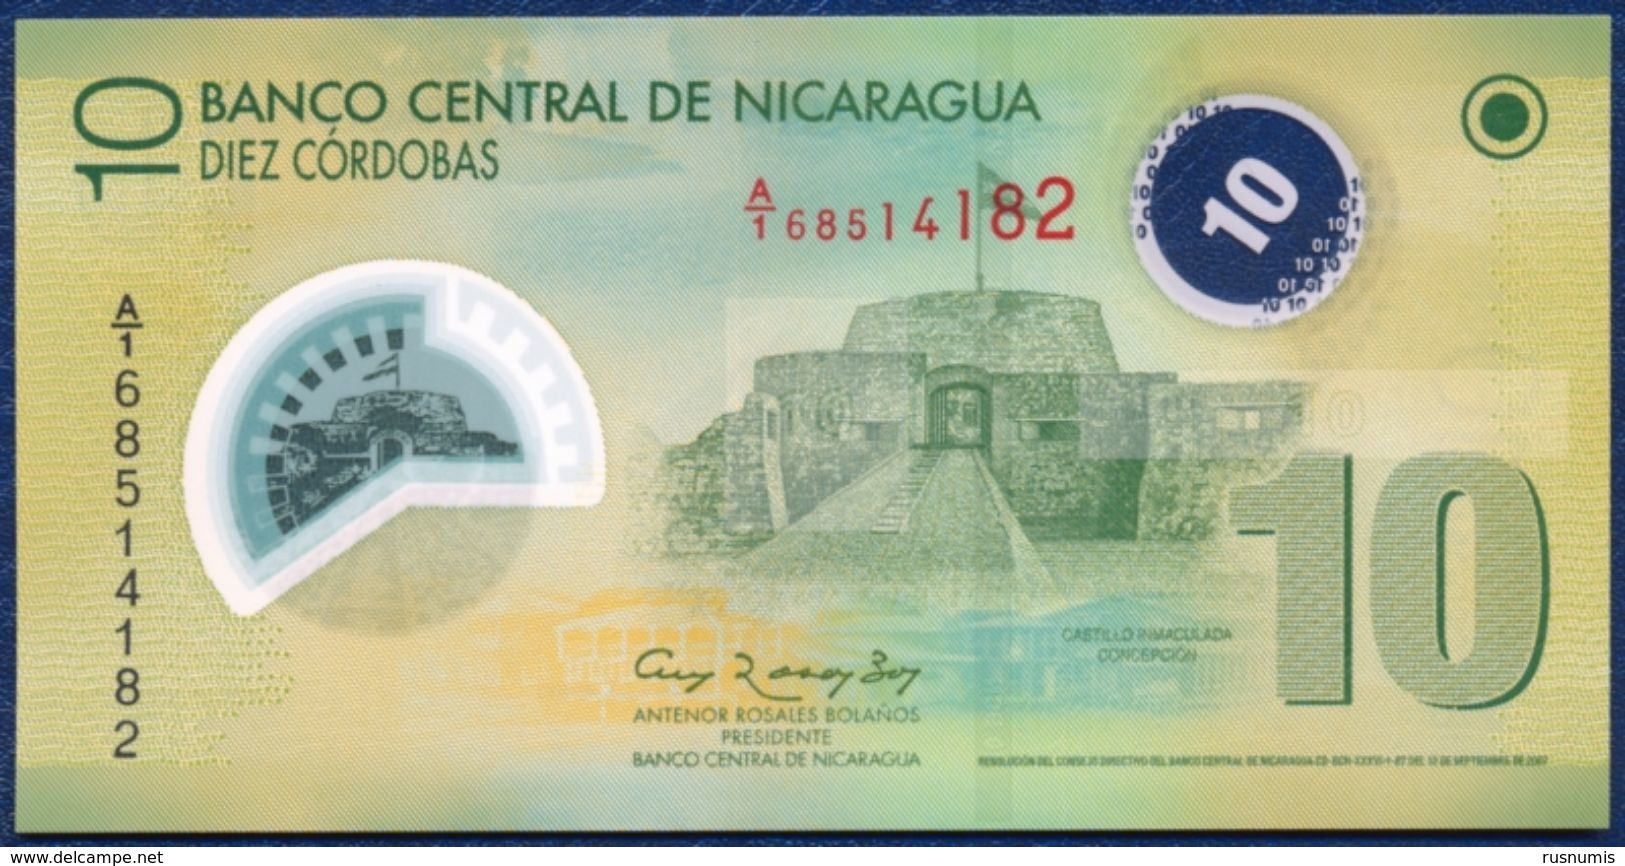 NICARAGUA 10 CORDOBAS P-201b CASTLE OF THE IMMACULATE CONCEPTION 2007 UNC - Nicaragua